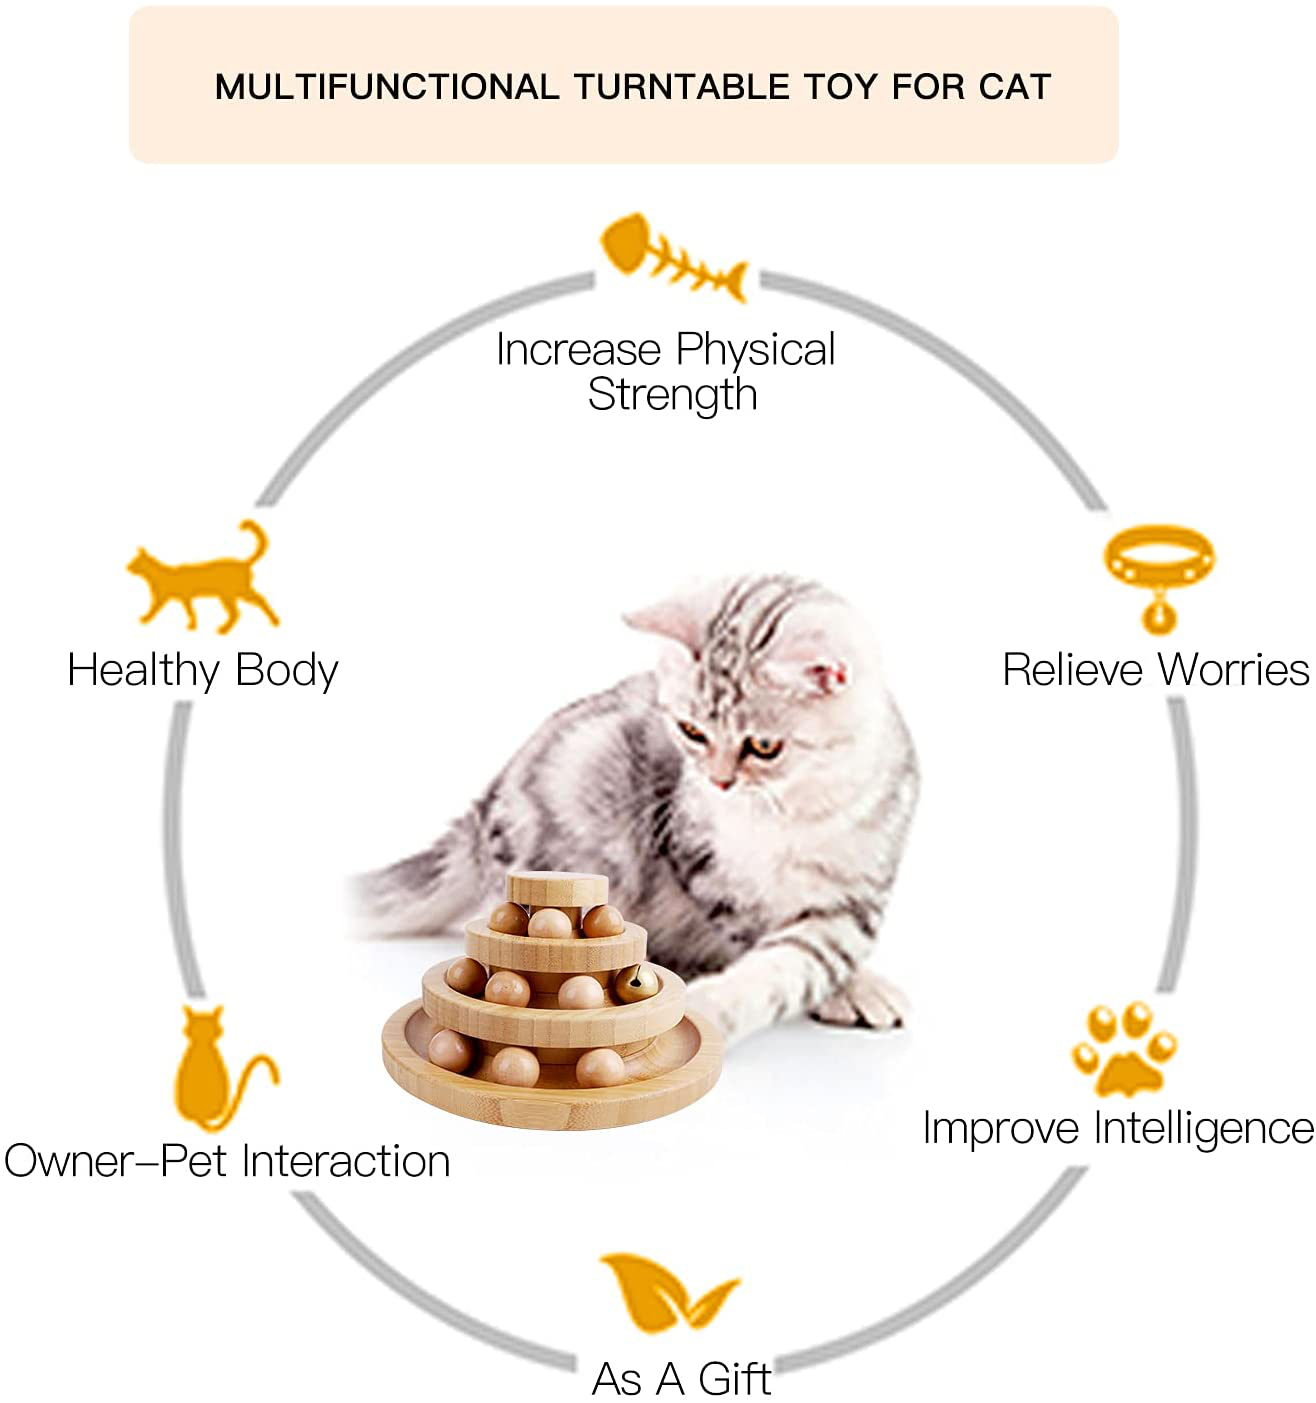 UPSKY Cat Toy Roller Cat Toys 3 Level Towers Tracks Roller with Six Colorful Ball Interactive Kitten Fun Mental Physical Exercise Puzzle Toys